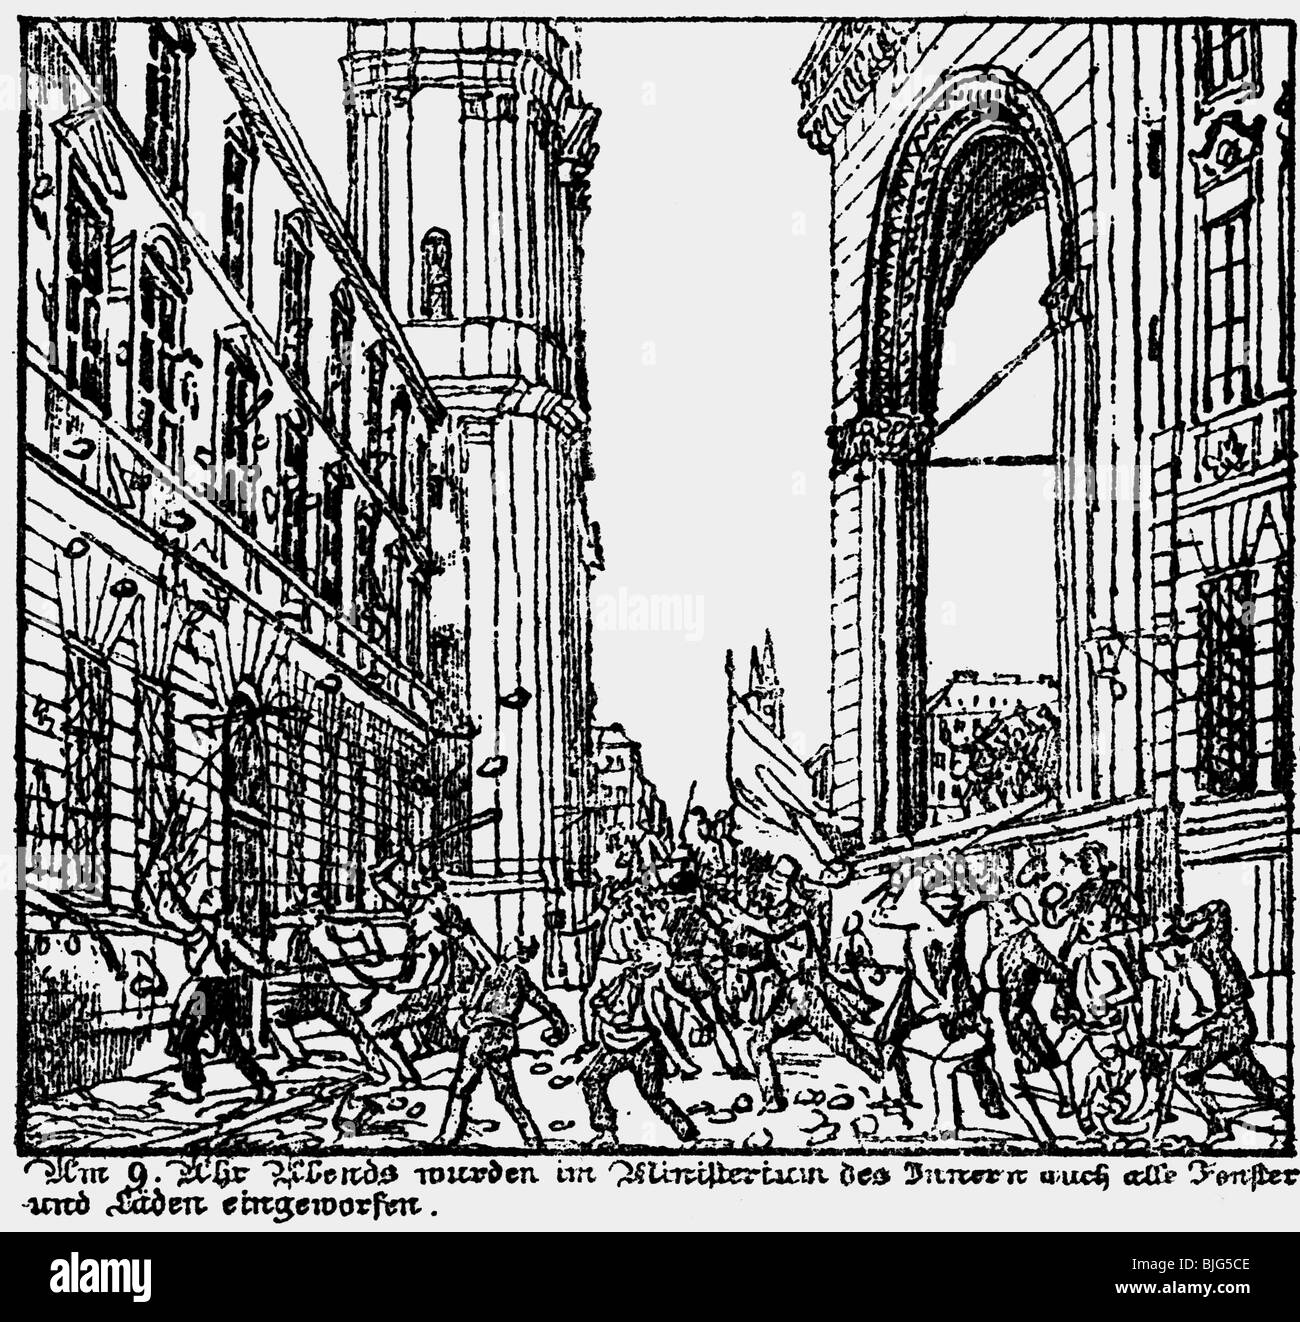 events, revolutions 1848 - 1849, March Revolution, Munich, the windows of the Minstery of the Interior are smashed, Theatinerstrasse, 2.3.1848, contemporary lithograph by Gustav Kraus, citizens, turmoil, revolution, Germany, Bavaria, 19th century, historic, historical, people, Stock Photo